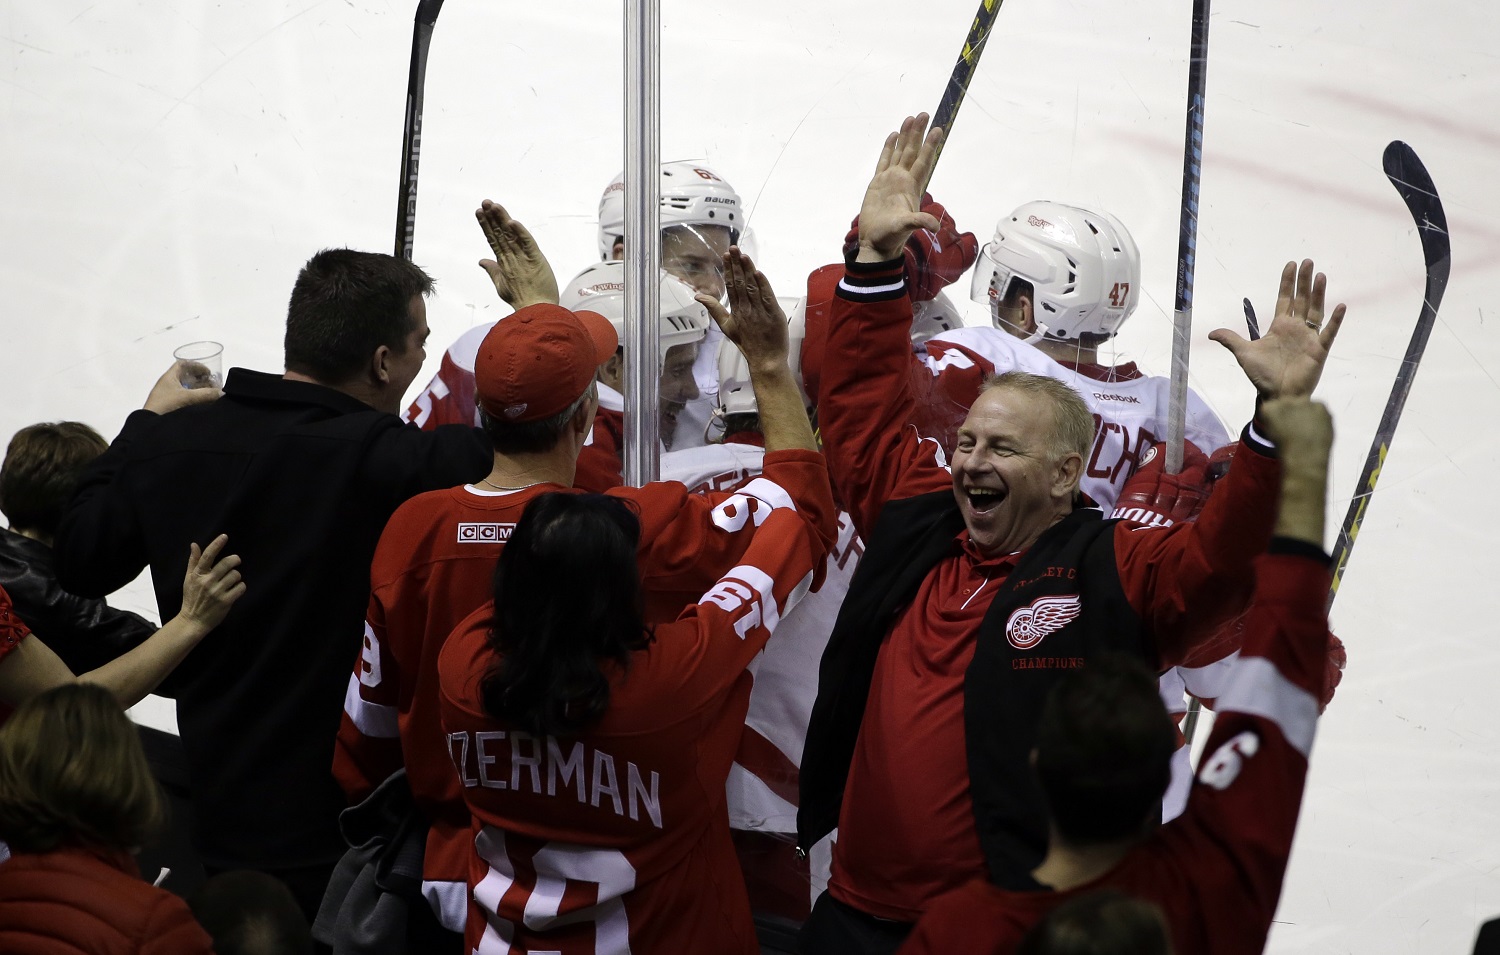 Fans celebrate a goal by Detroit Red Wings' Justin Abdelkader during the third period of an NHL hockey game against the San Jose Sharks Thursday, Jan. 7, 2016, in San Jose, Calif. Detroit won 2-1. (AP Photo/Marcio Jose Sanchez)